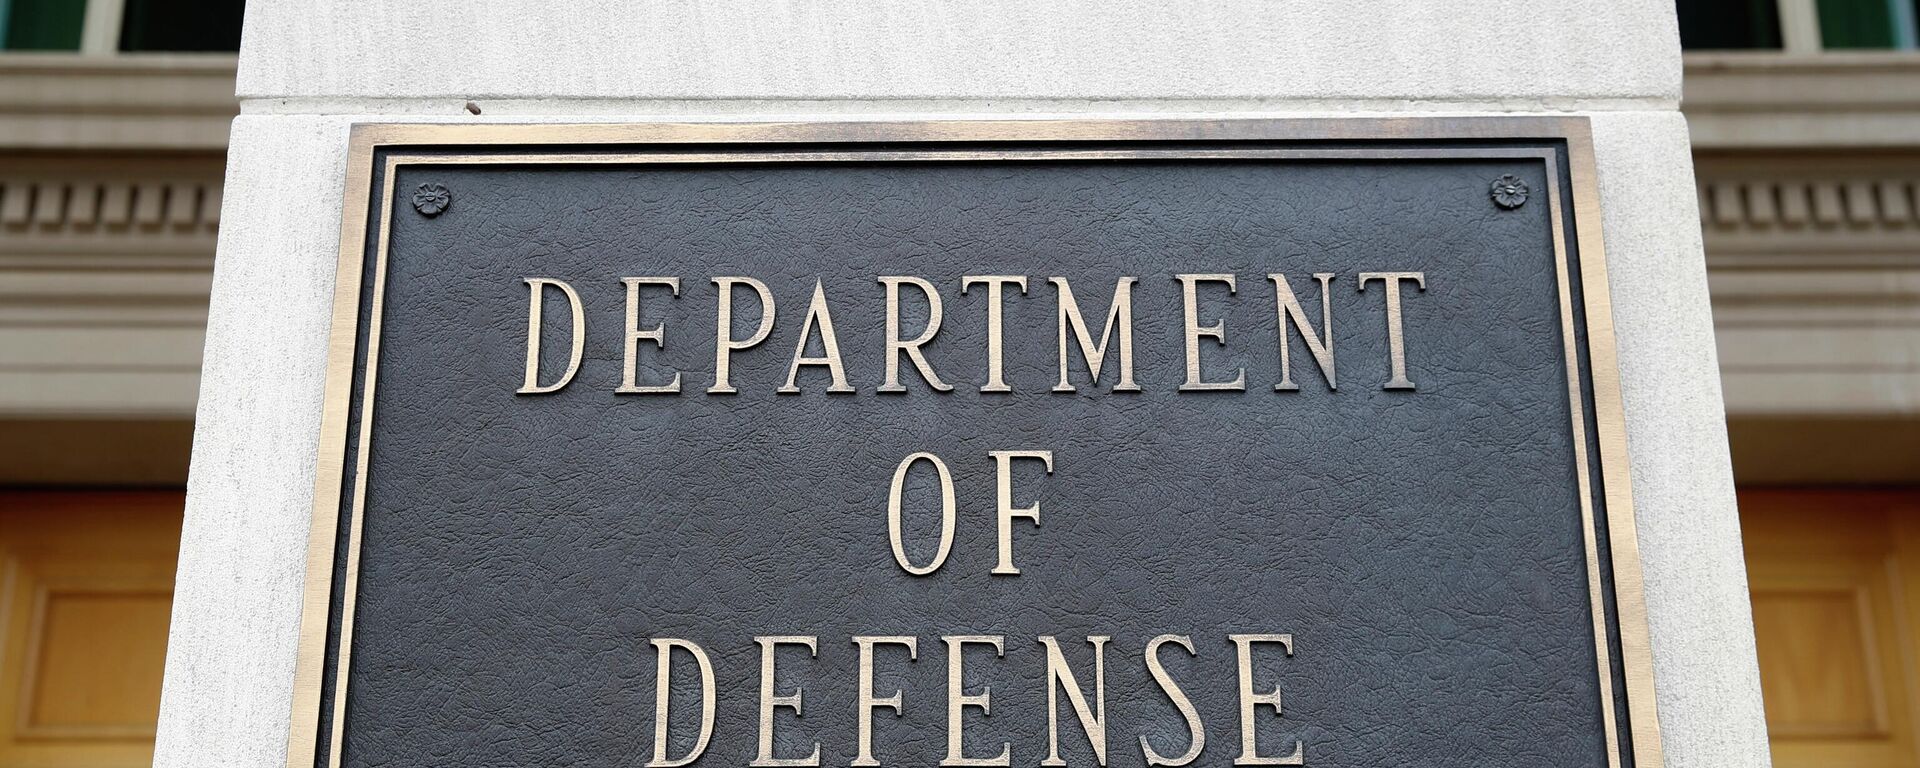 This April 19, 2019 file photo shows a sign for the Department of Defense at the Pentagon in Washington.  - Sputnik International, 1920, 12.02.2023